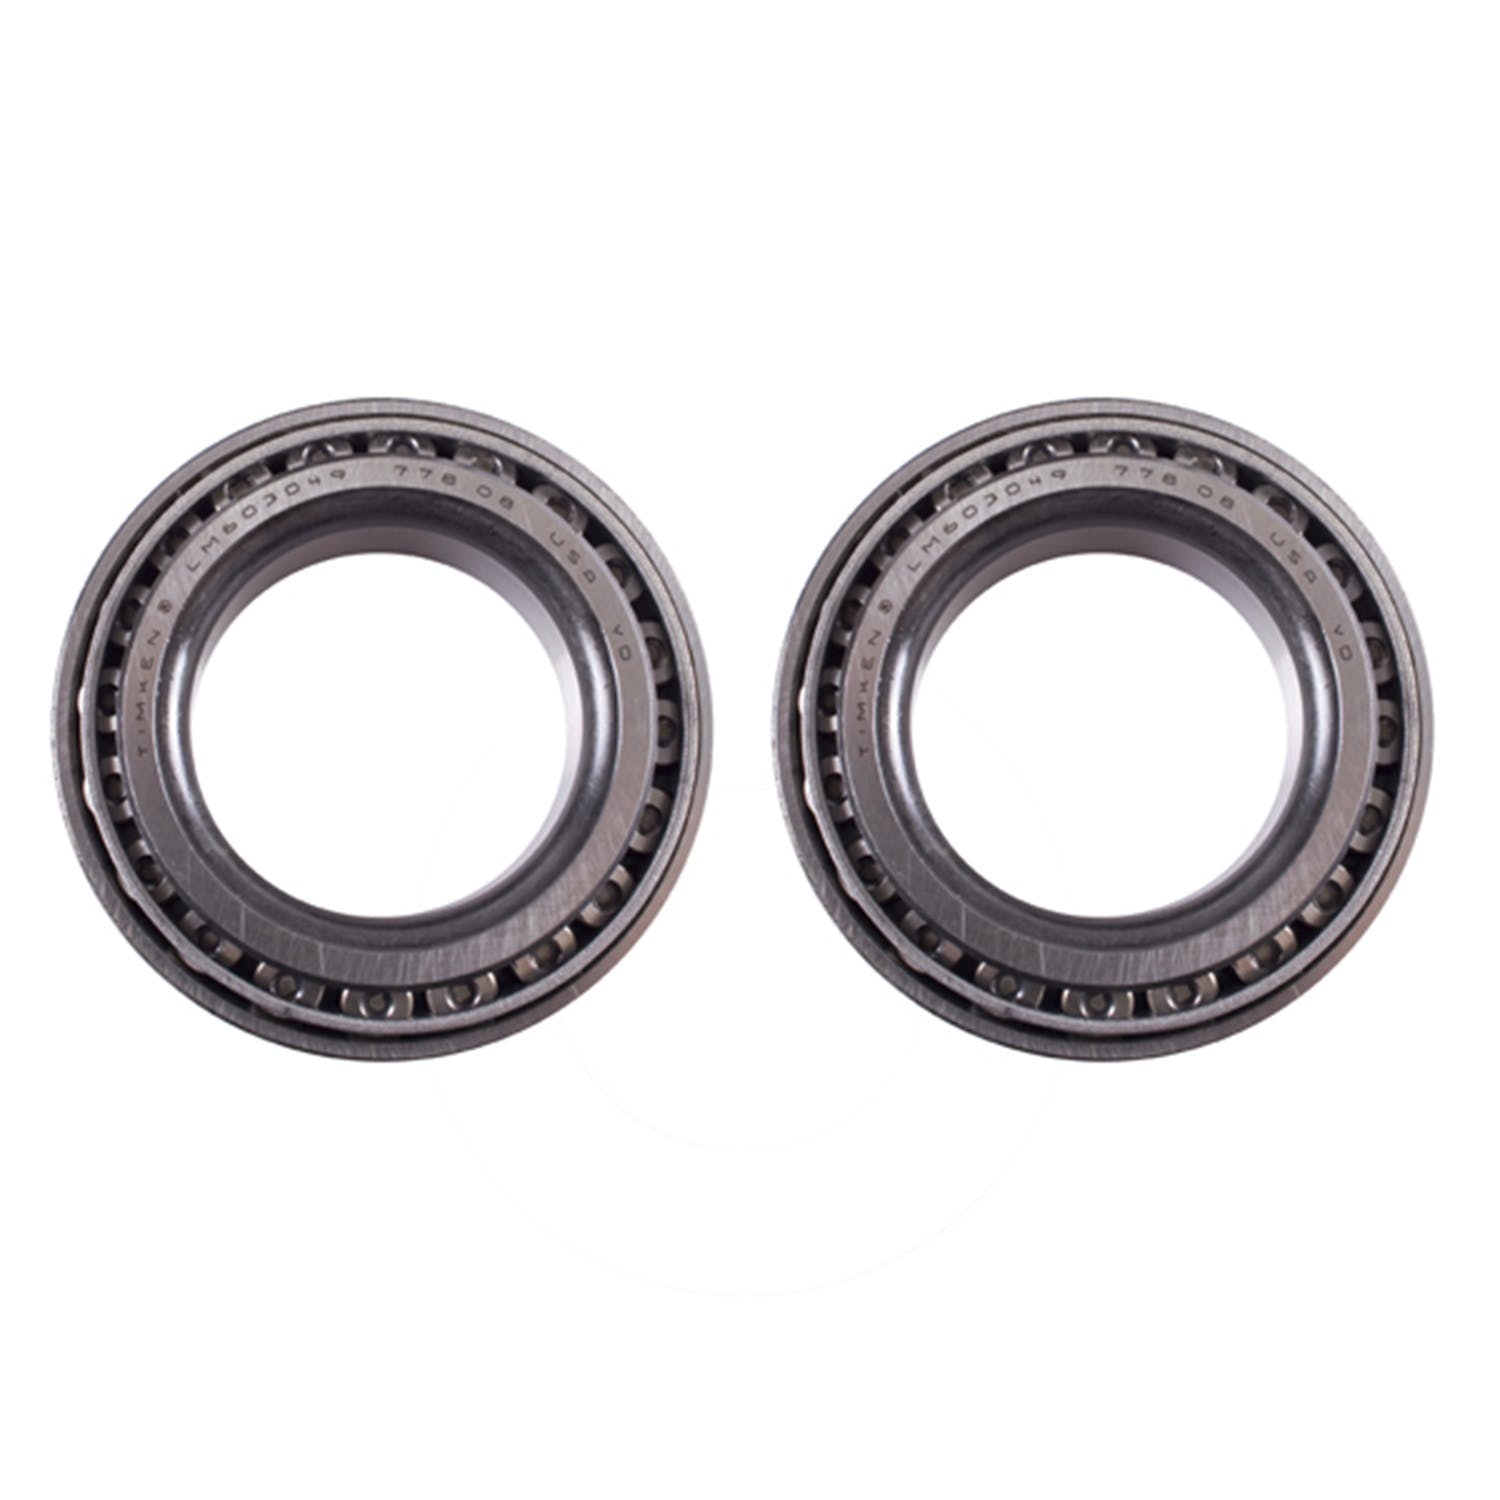 Omix-ADA 16525.30 Differential Bearing Kit